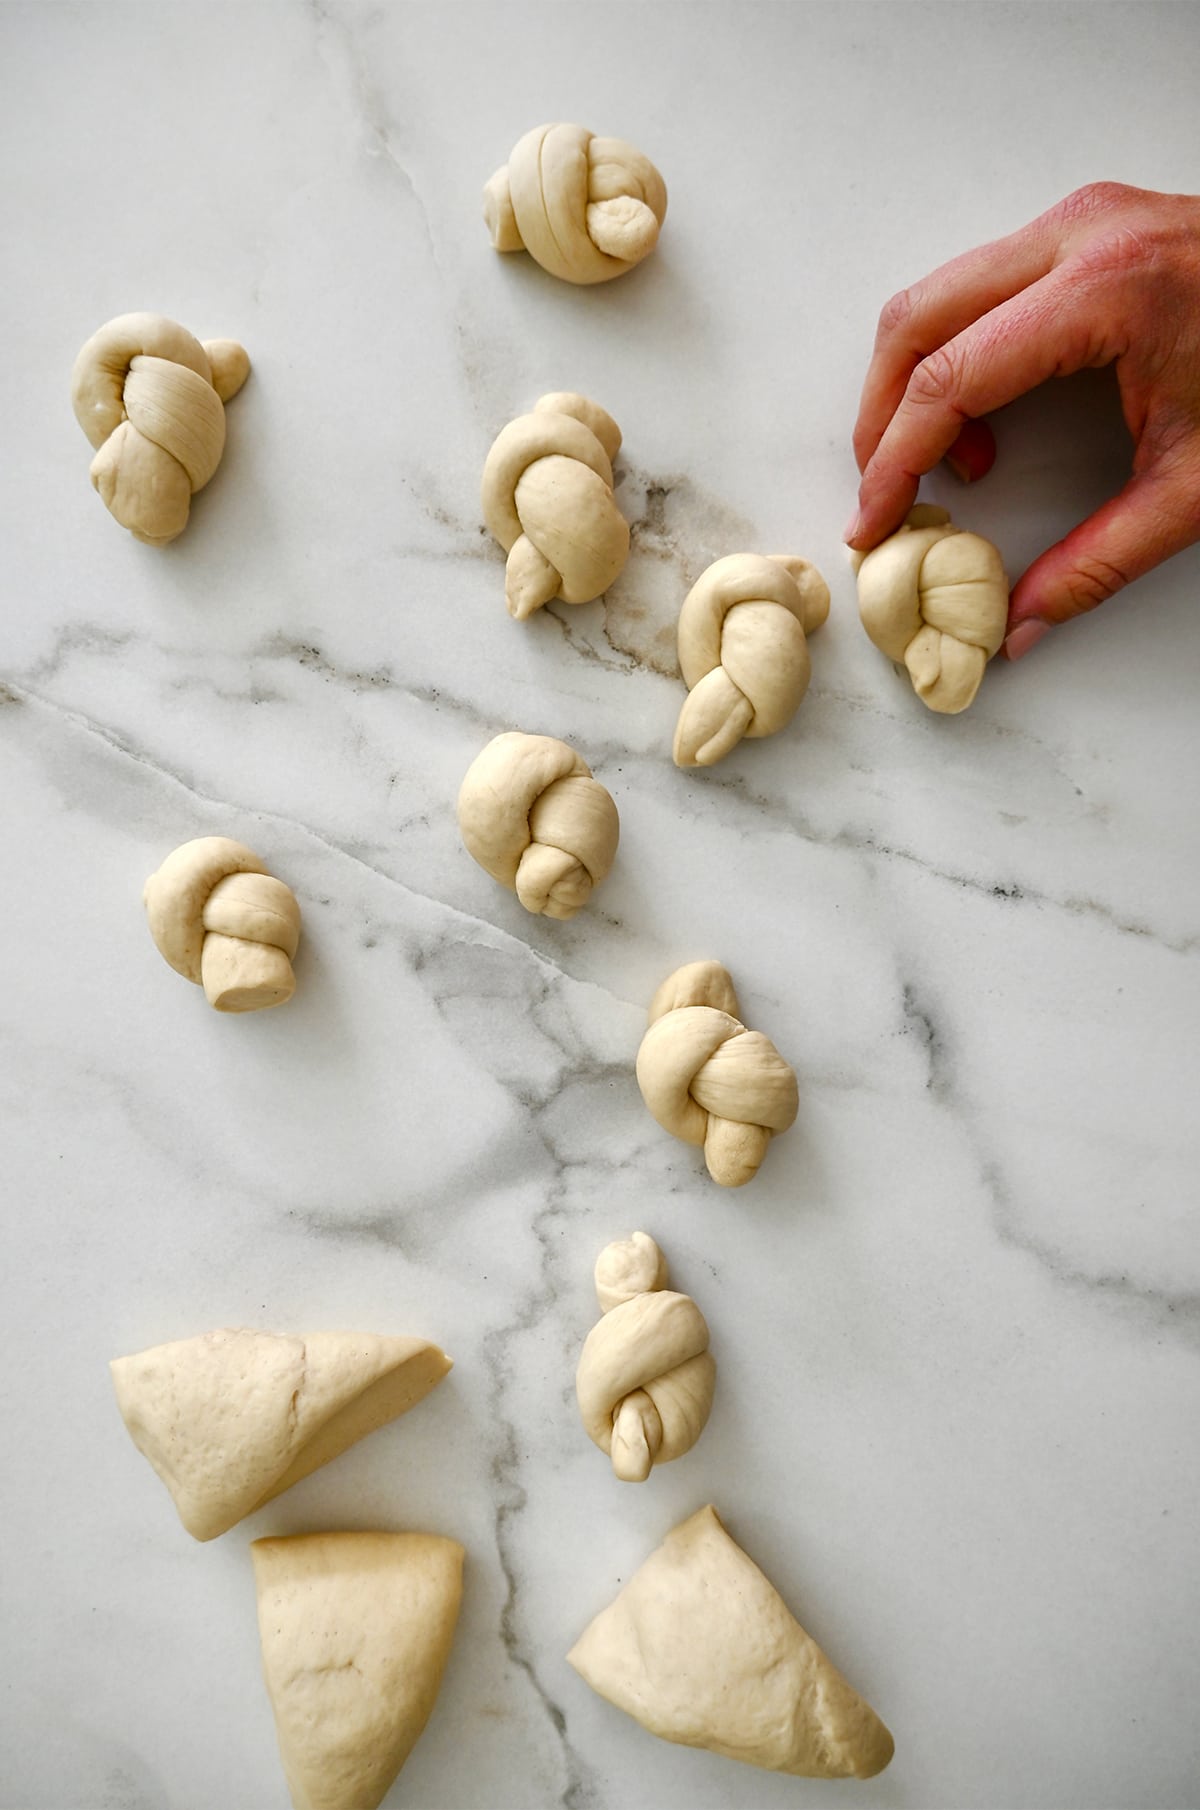 Pizza dough shaped into knots on a marble surface.